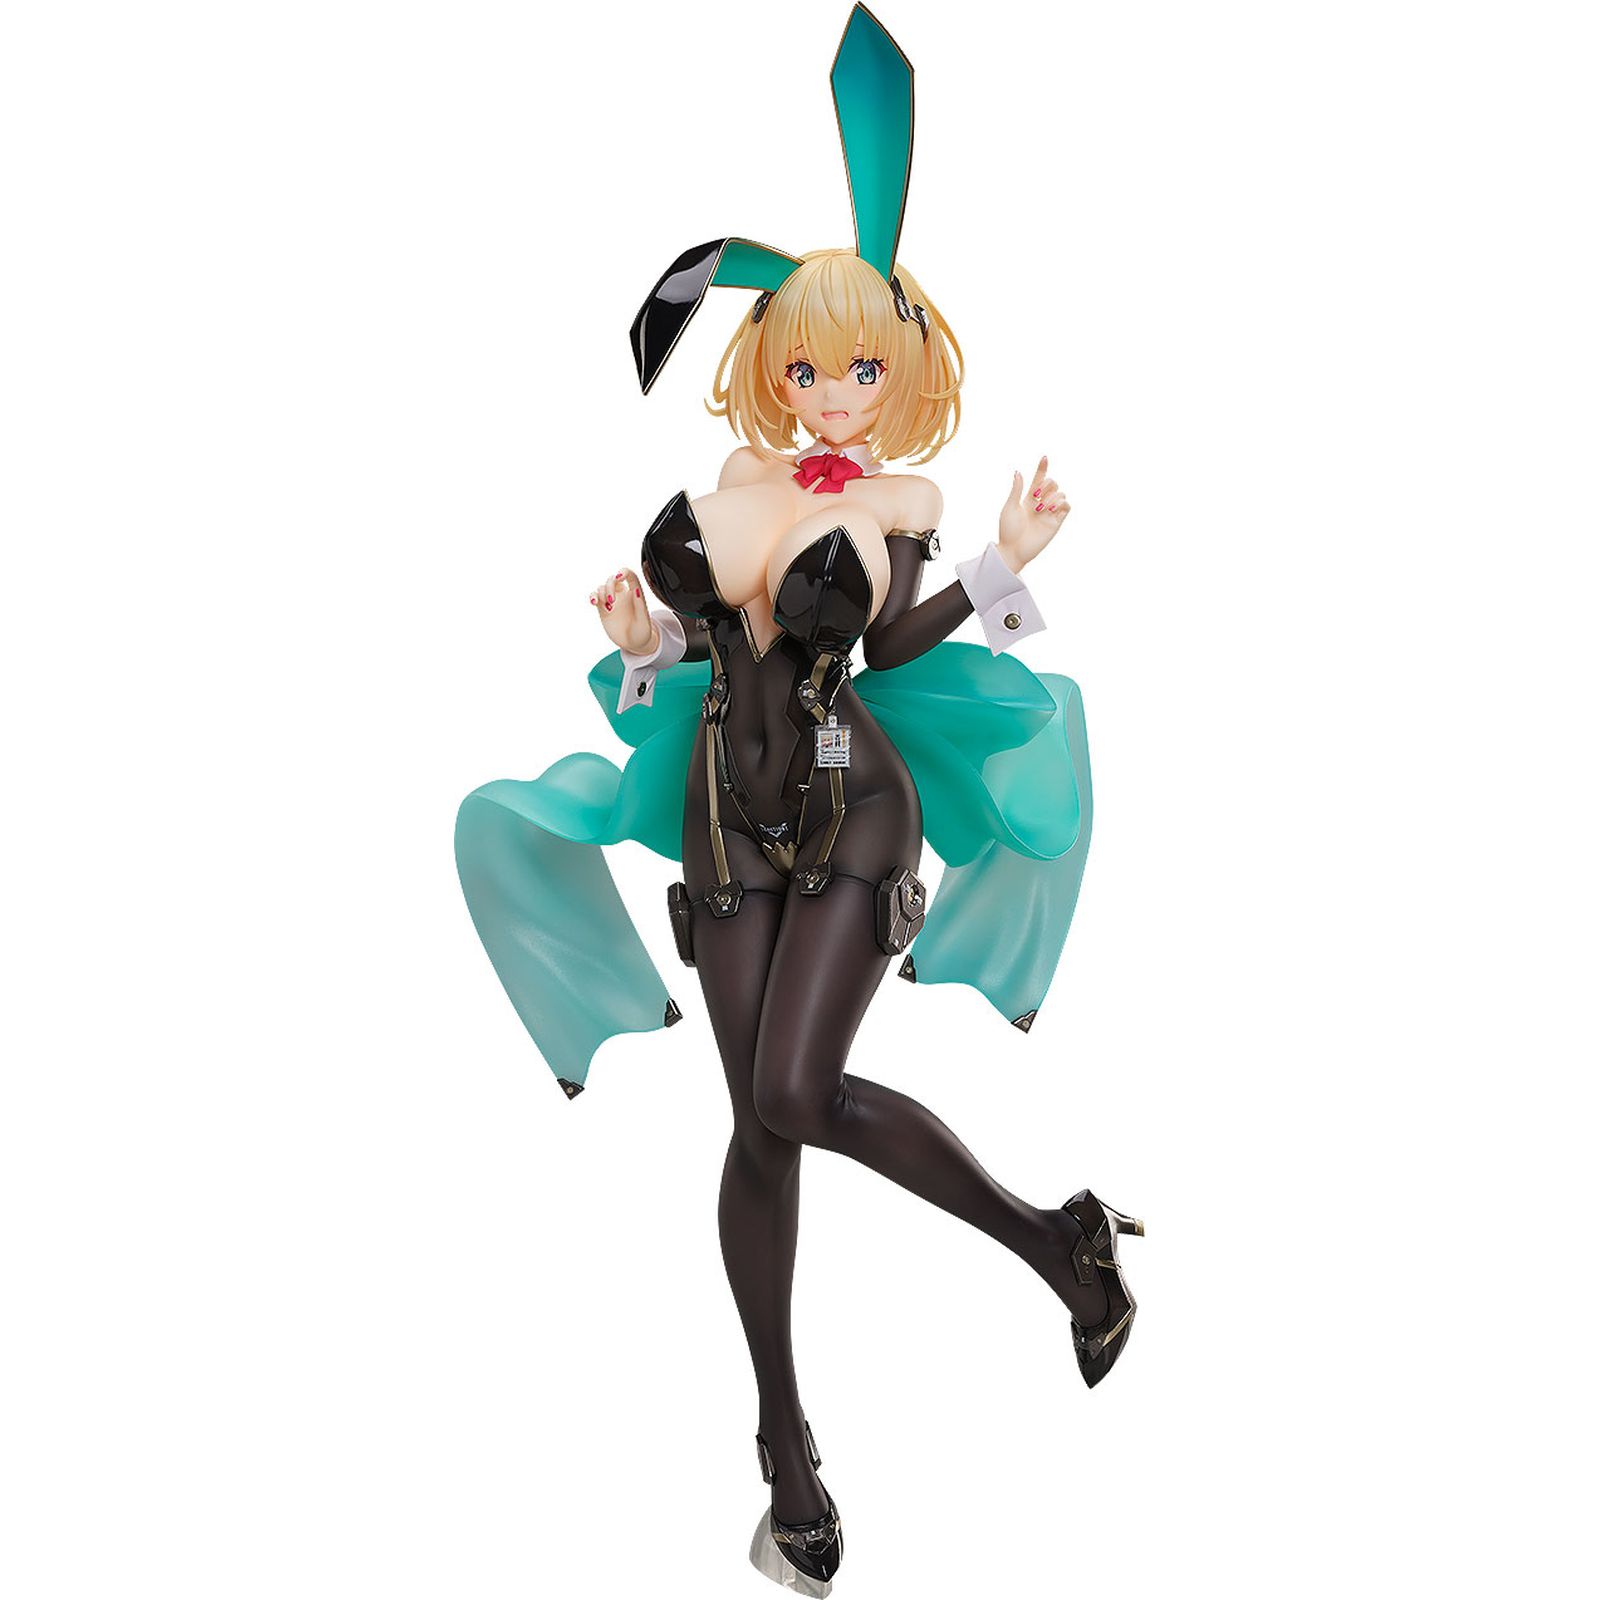 SOPHIA F SHIRRING BUNNY VER FIG 51 CM BUNNY SUIT PLANNING 1/4 SCALE